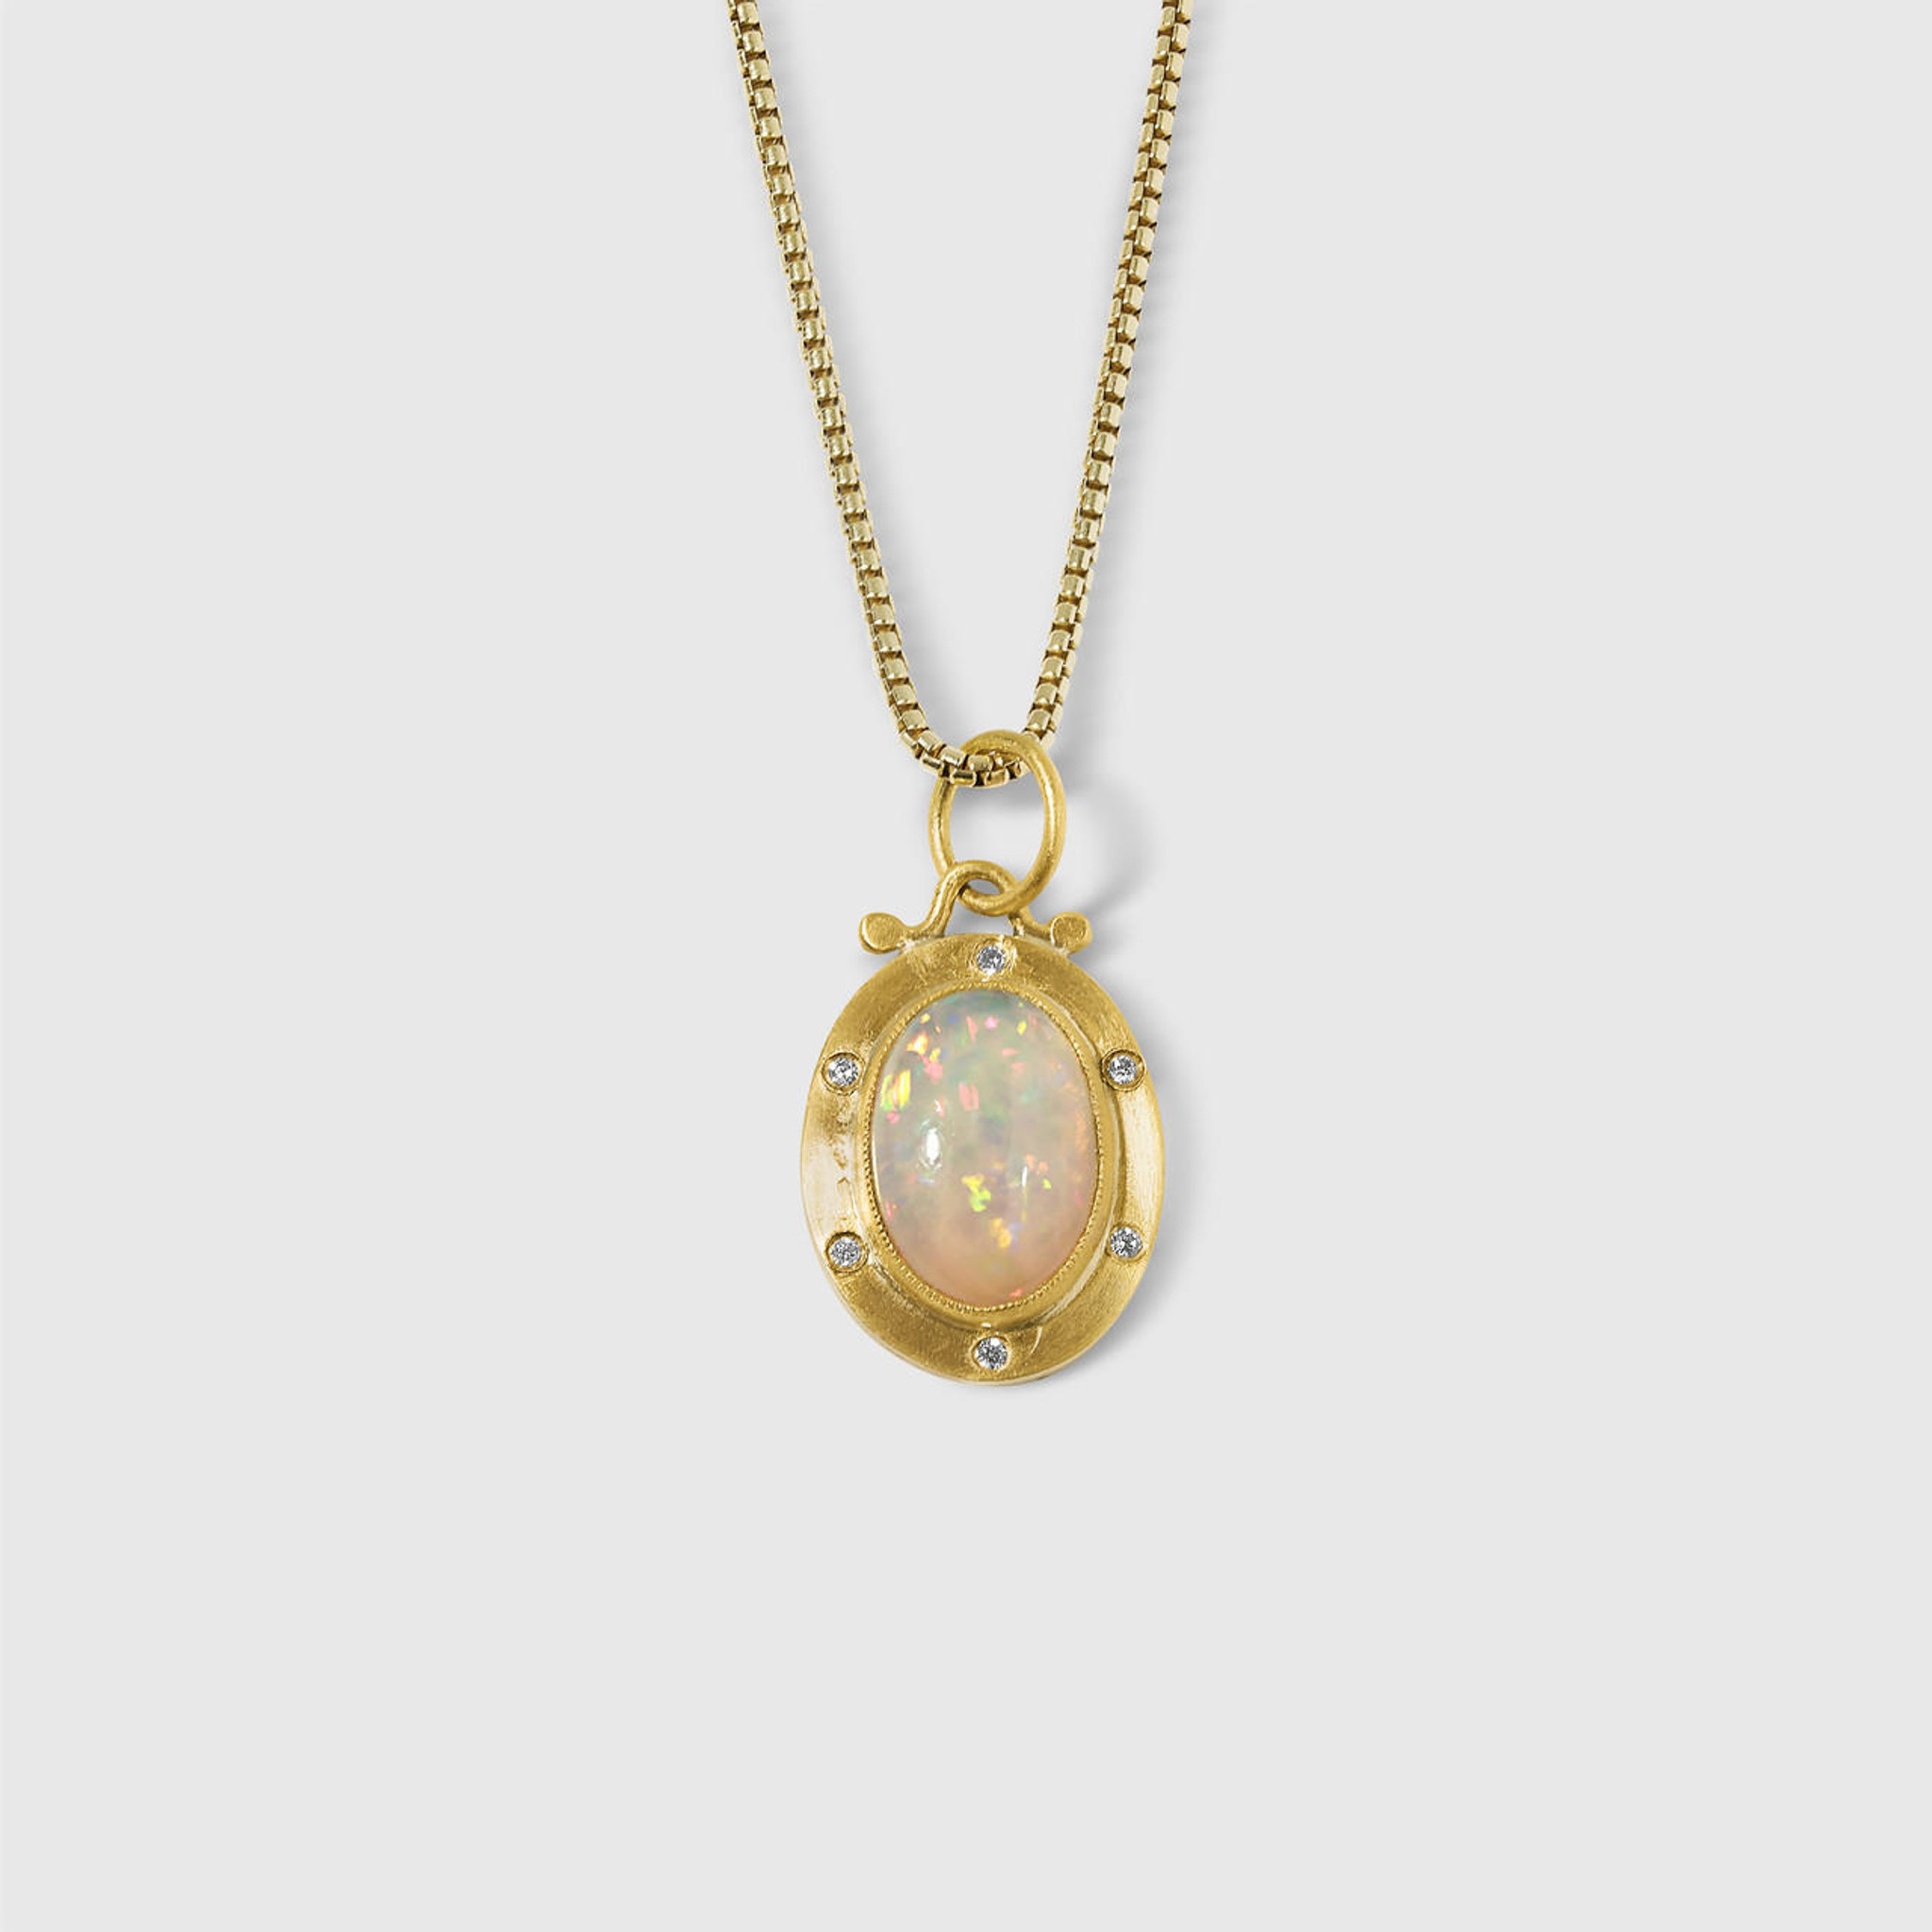 2.25ct Oval Opal Charm Pendant Necklace with Diamonds, 24kt Gold and Silver | elk & HAMMER Gallery